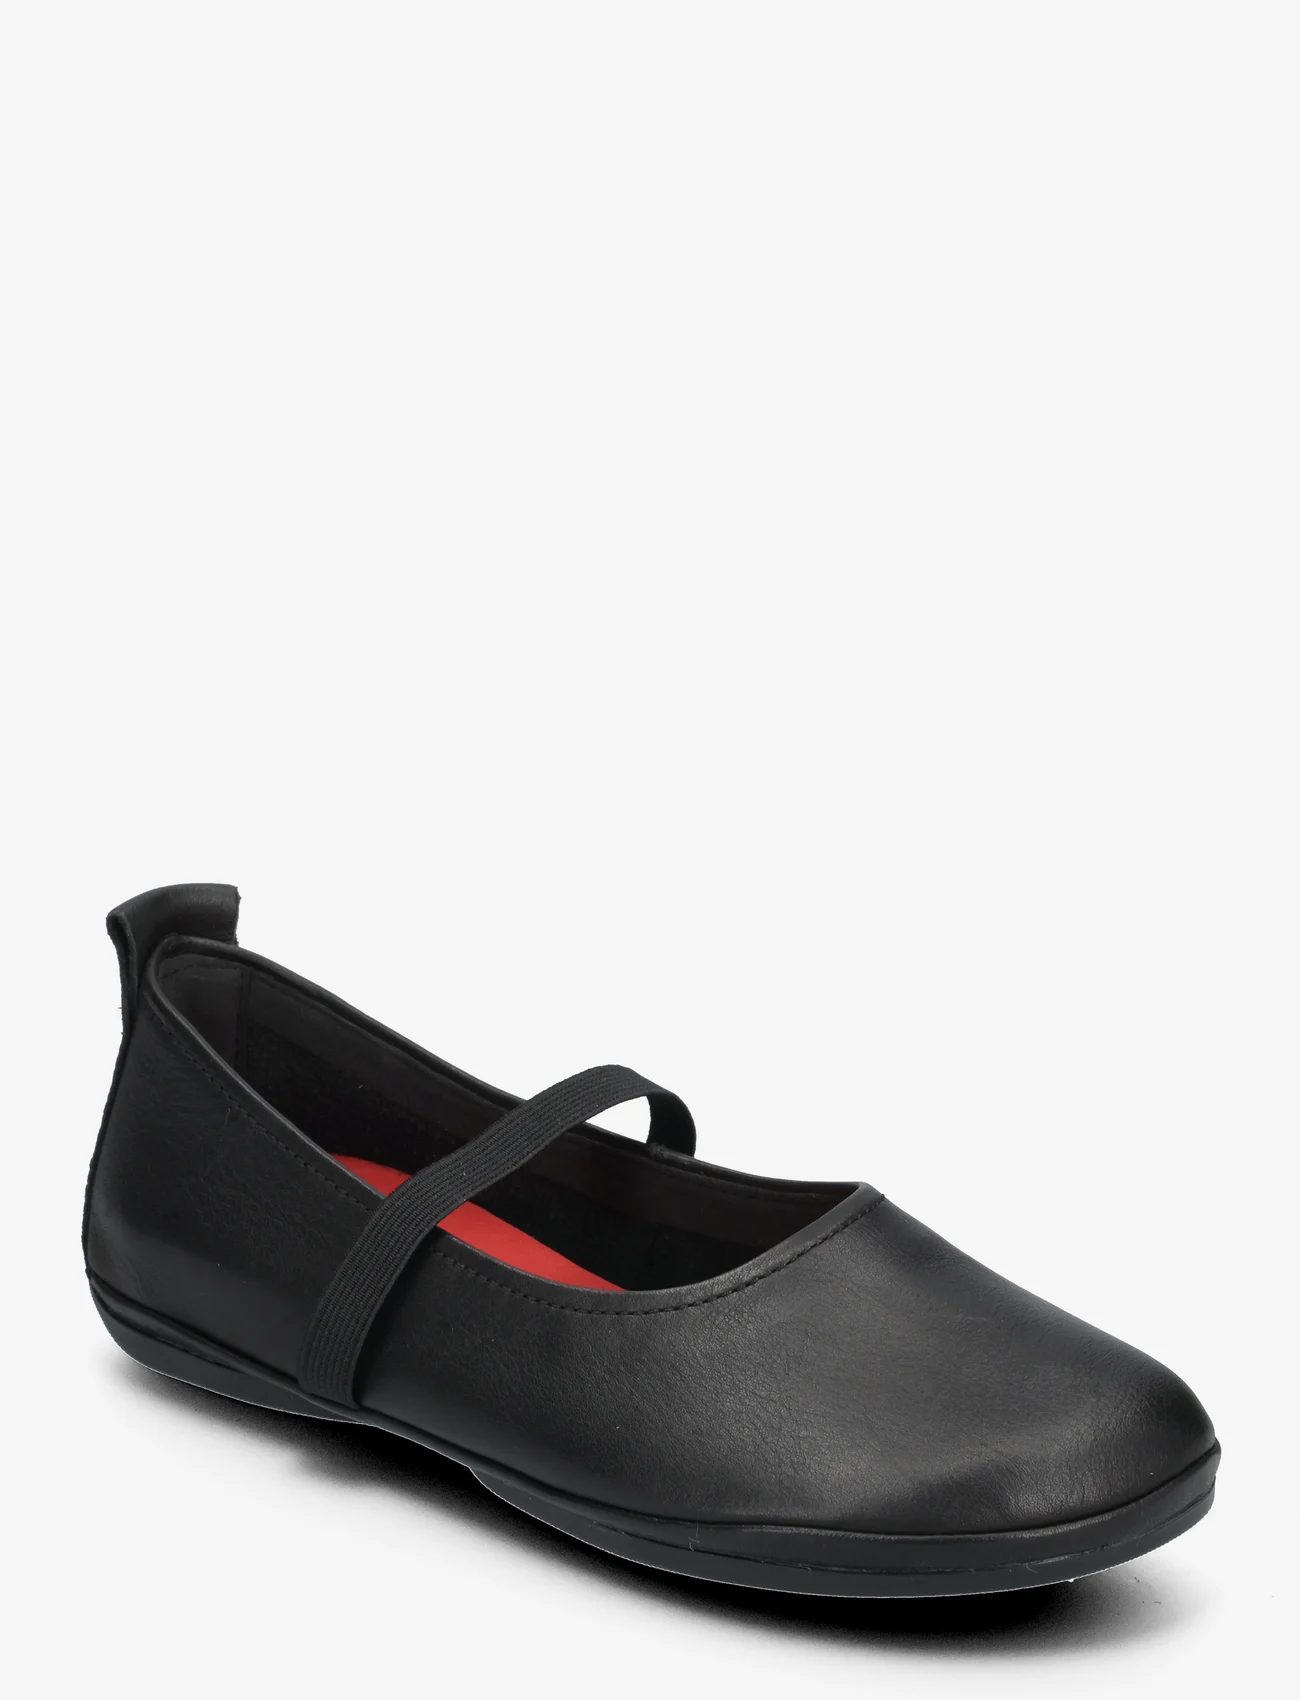 Camper - Right Nina - party wear at outlet prices - black - 0